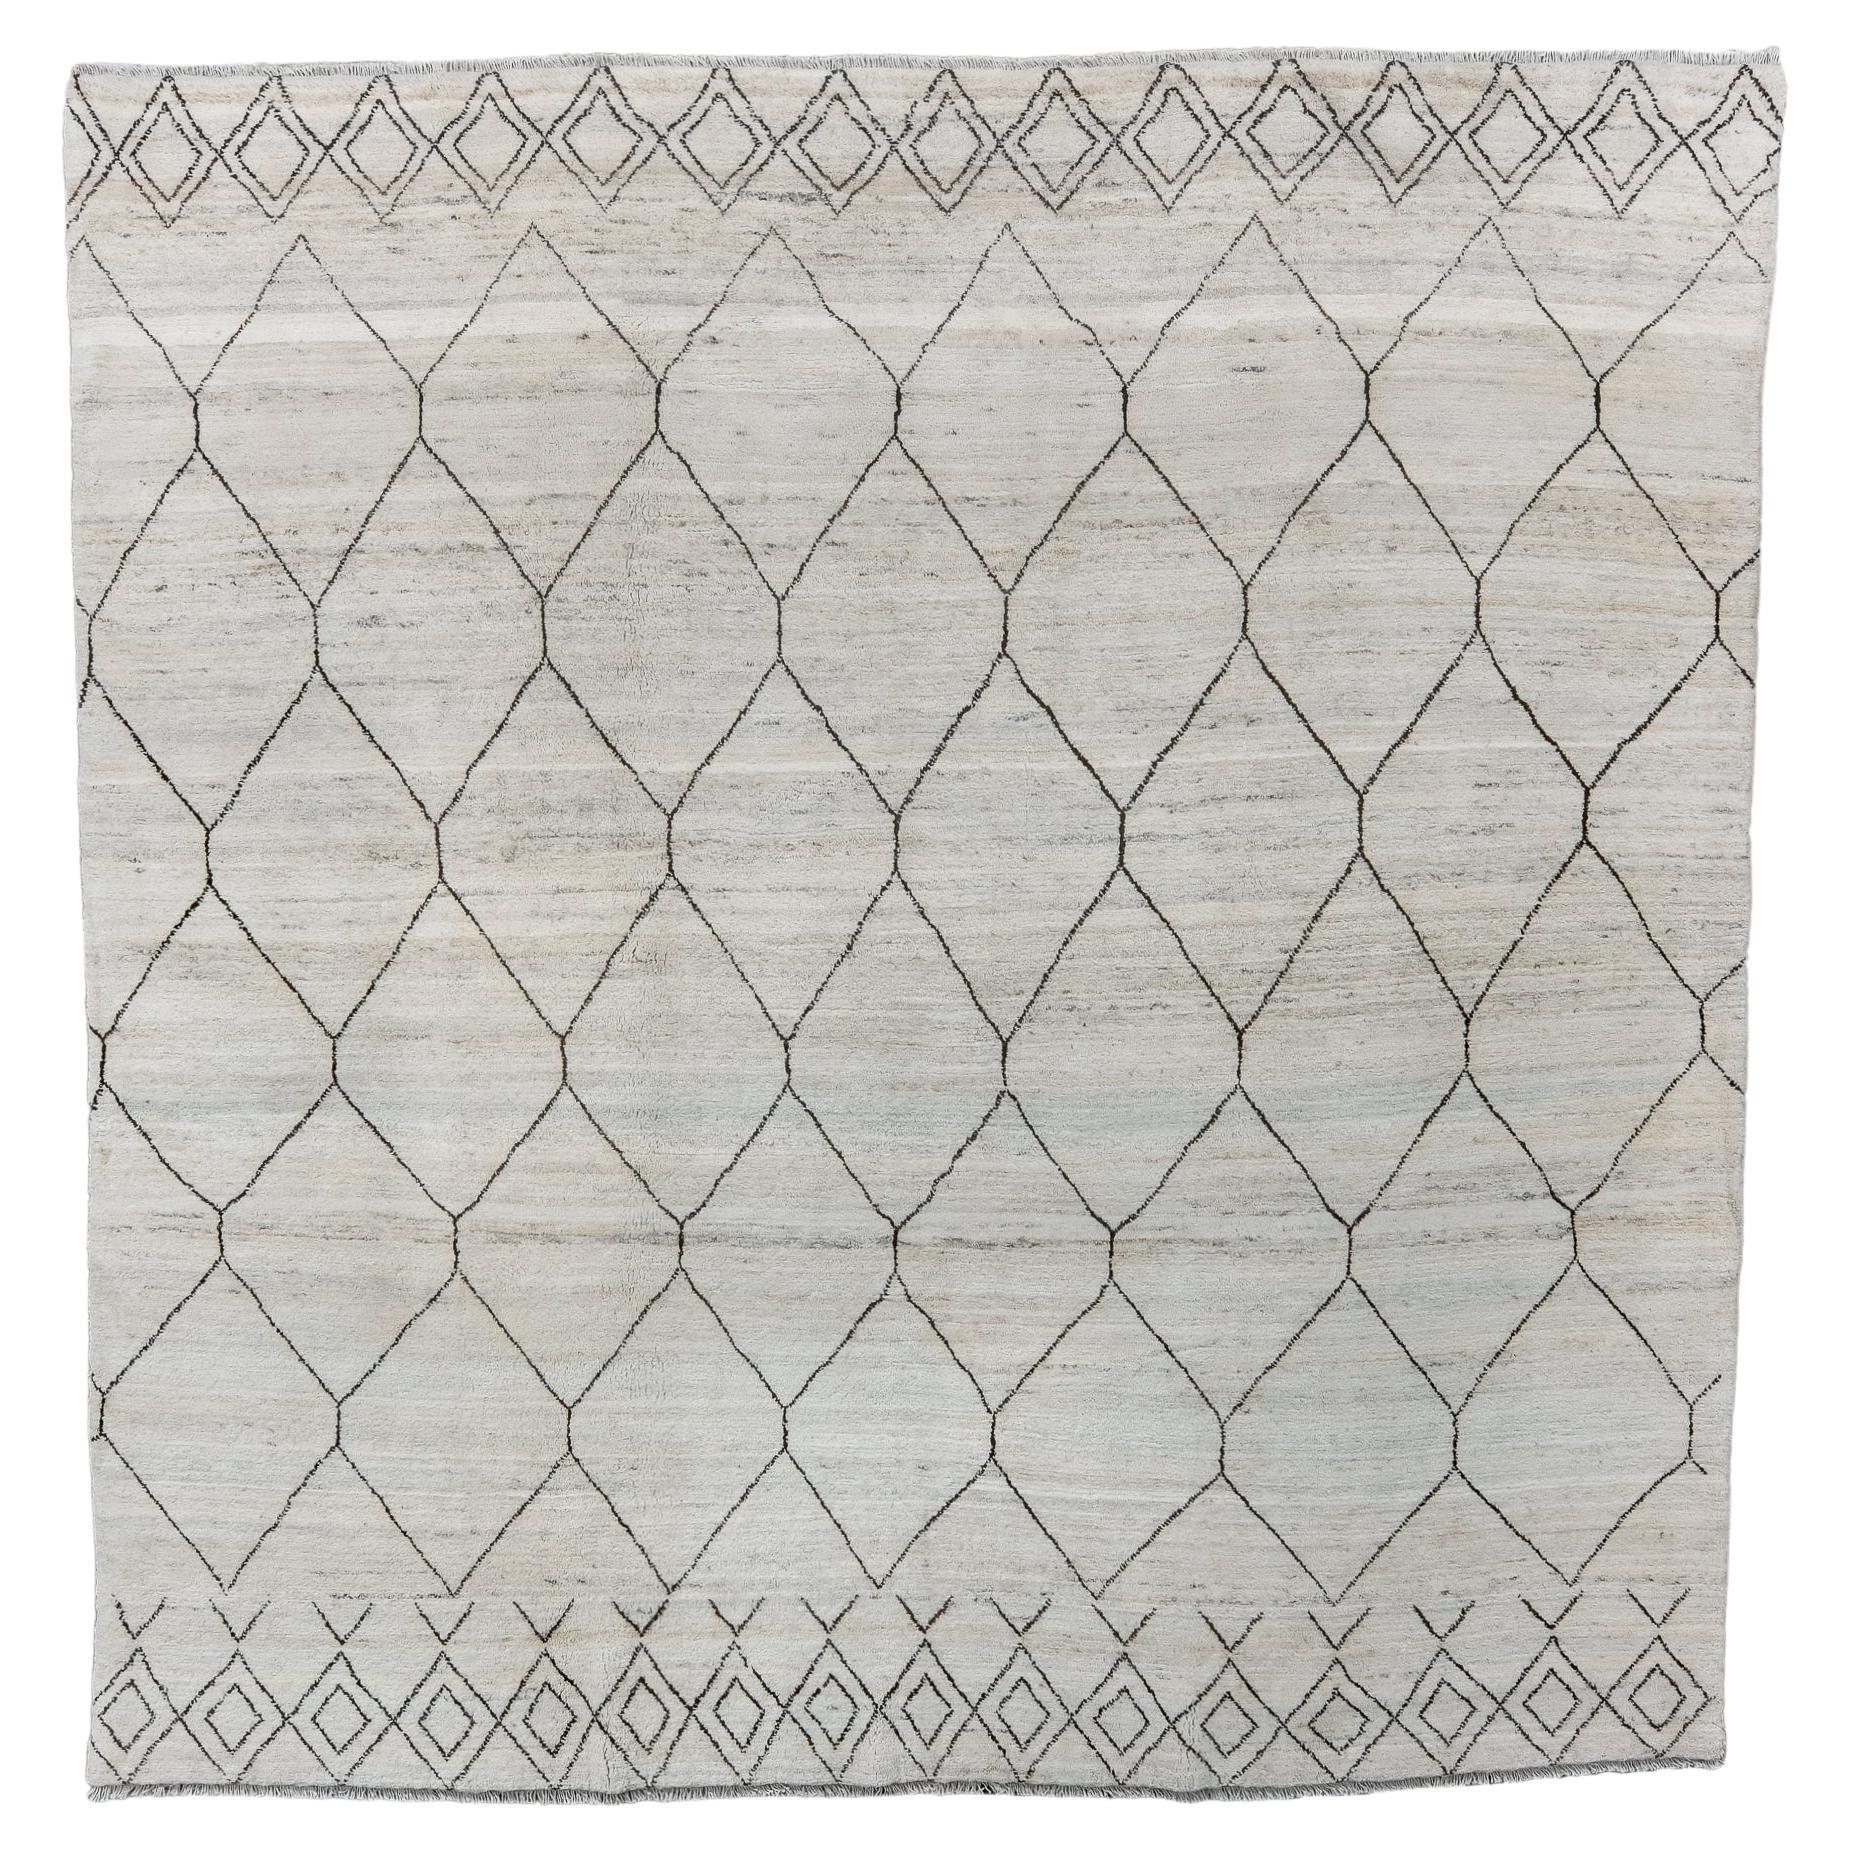 Contemporary Moroccan Berber Square Rug with Natural Field and Diamond Designs For Sale